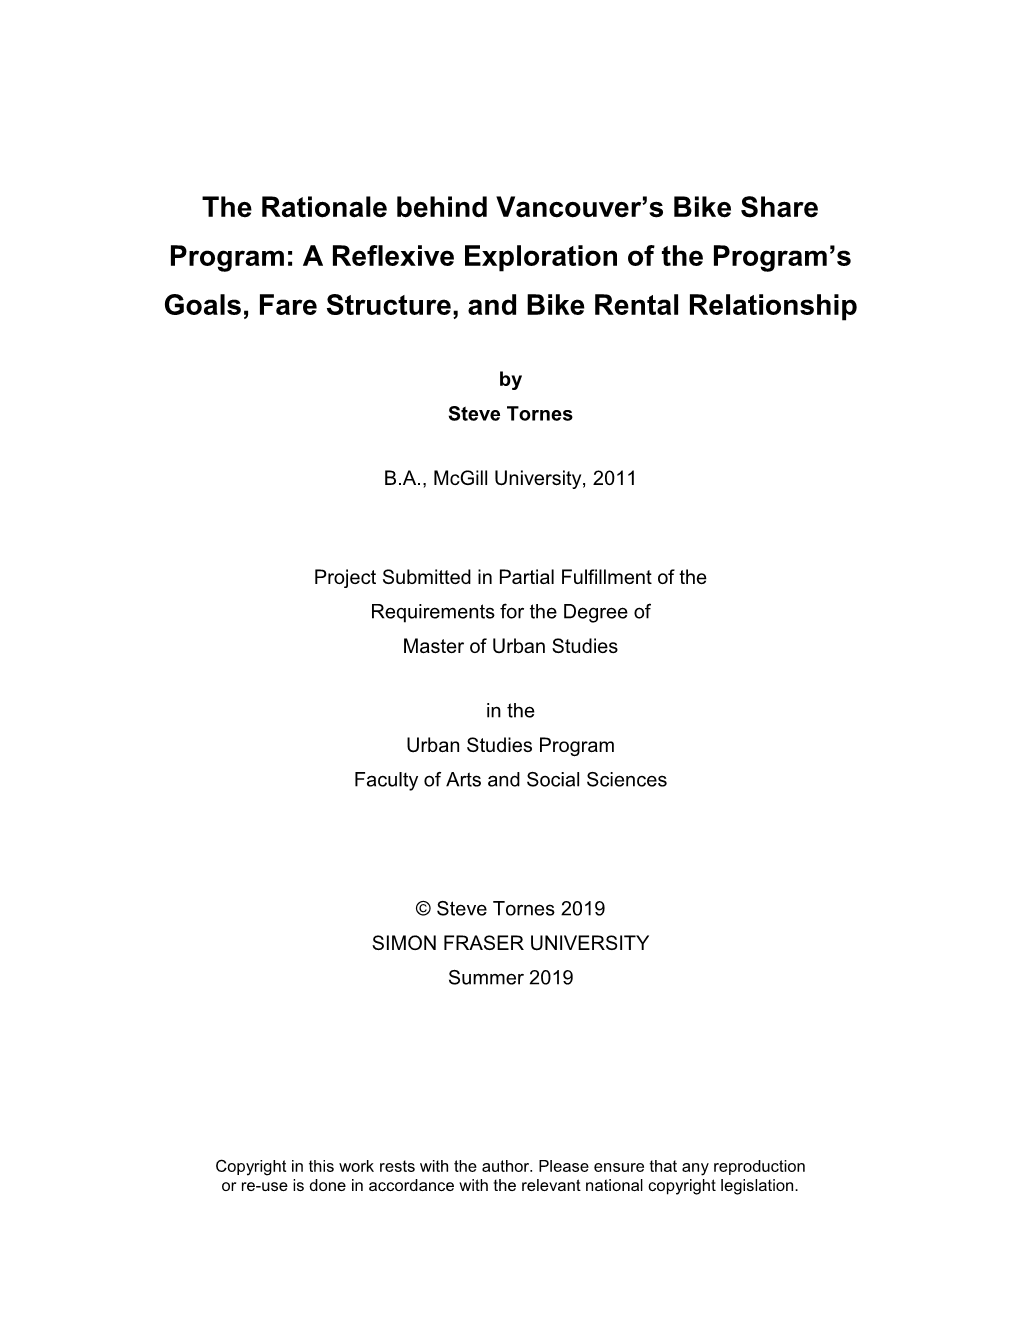 The Rationale Behind Vancouver's Bike Share Program